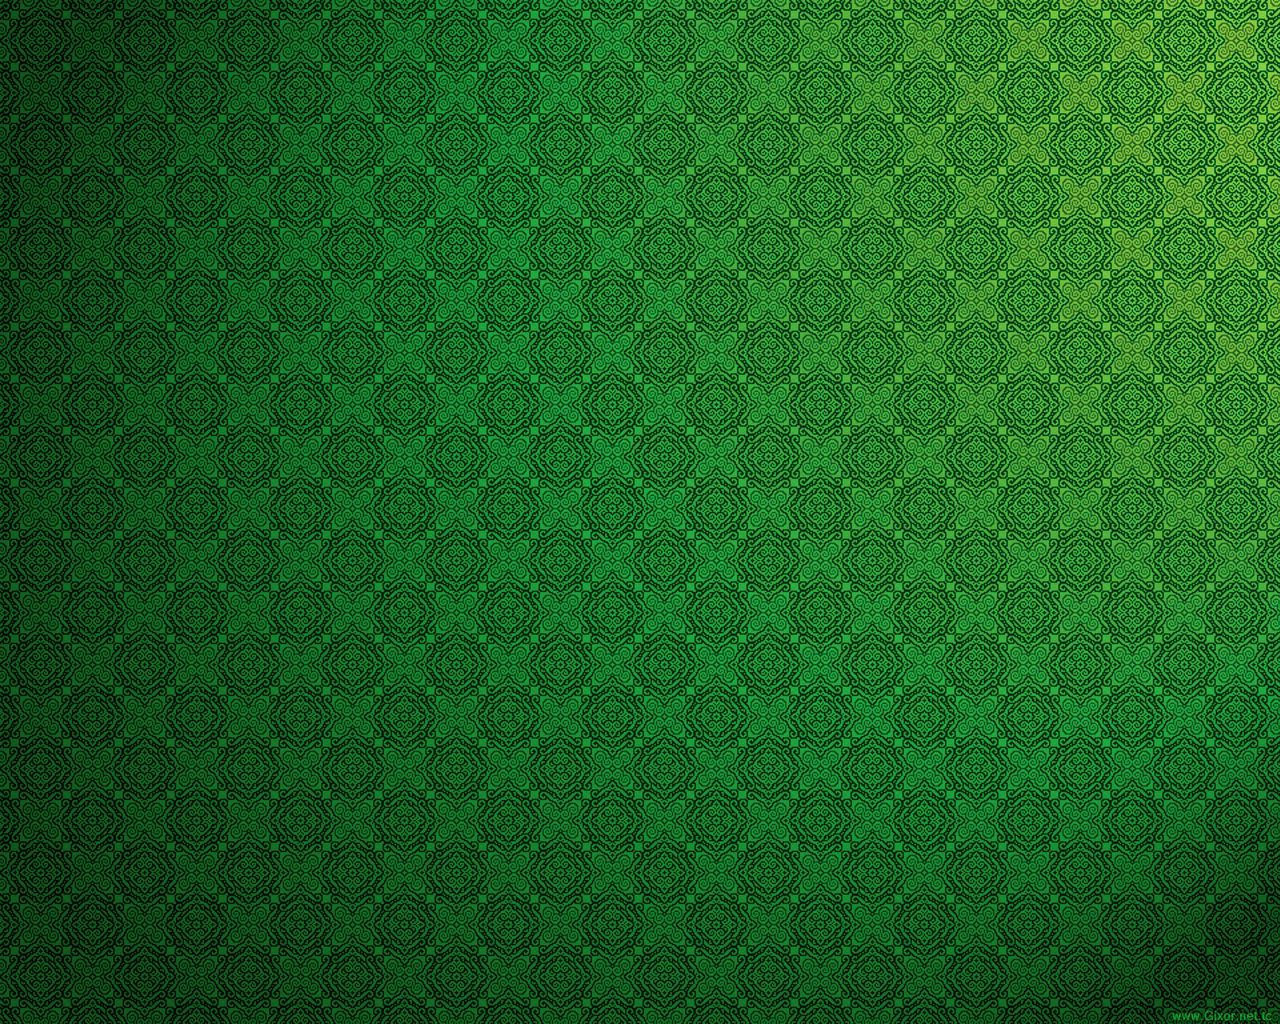 Green background hd free wallpapers | Only hd wallpapers